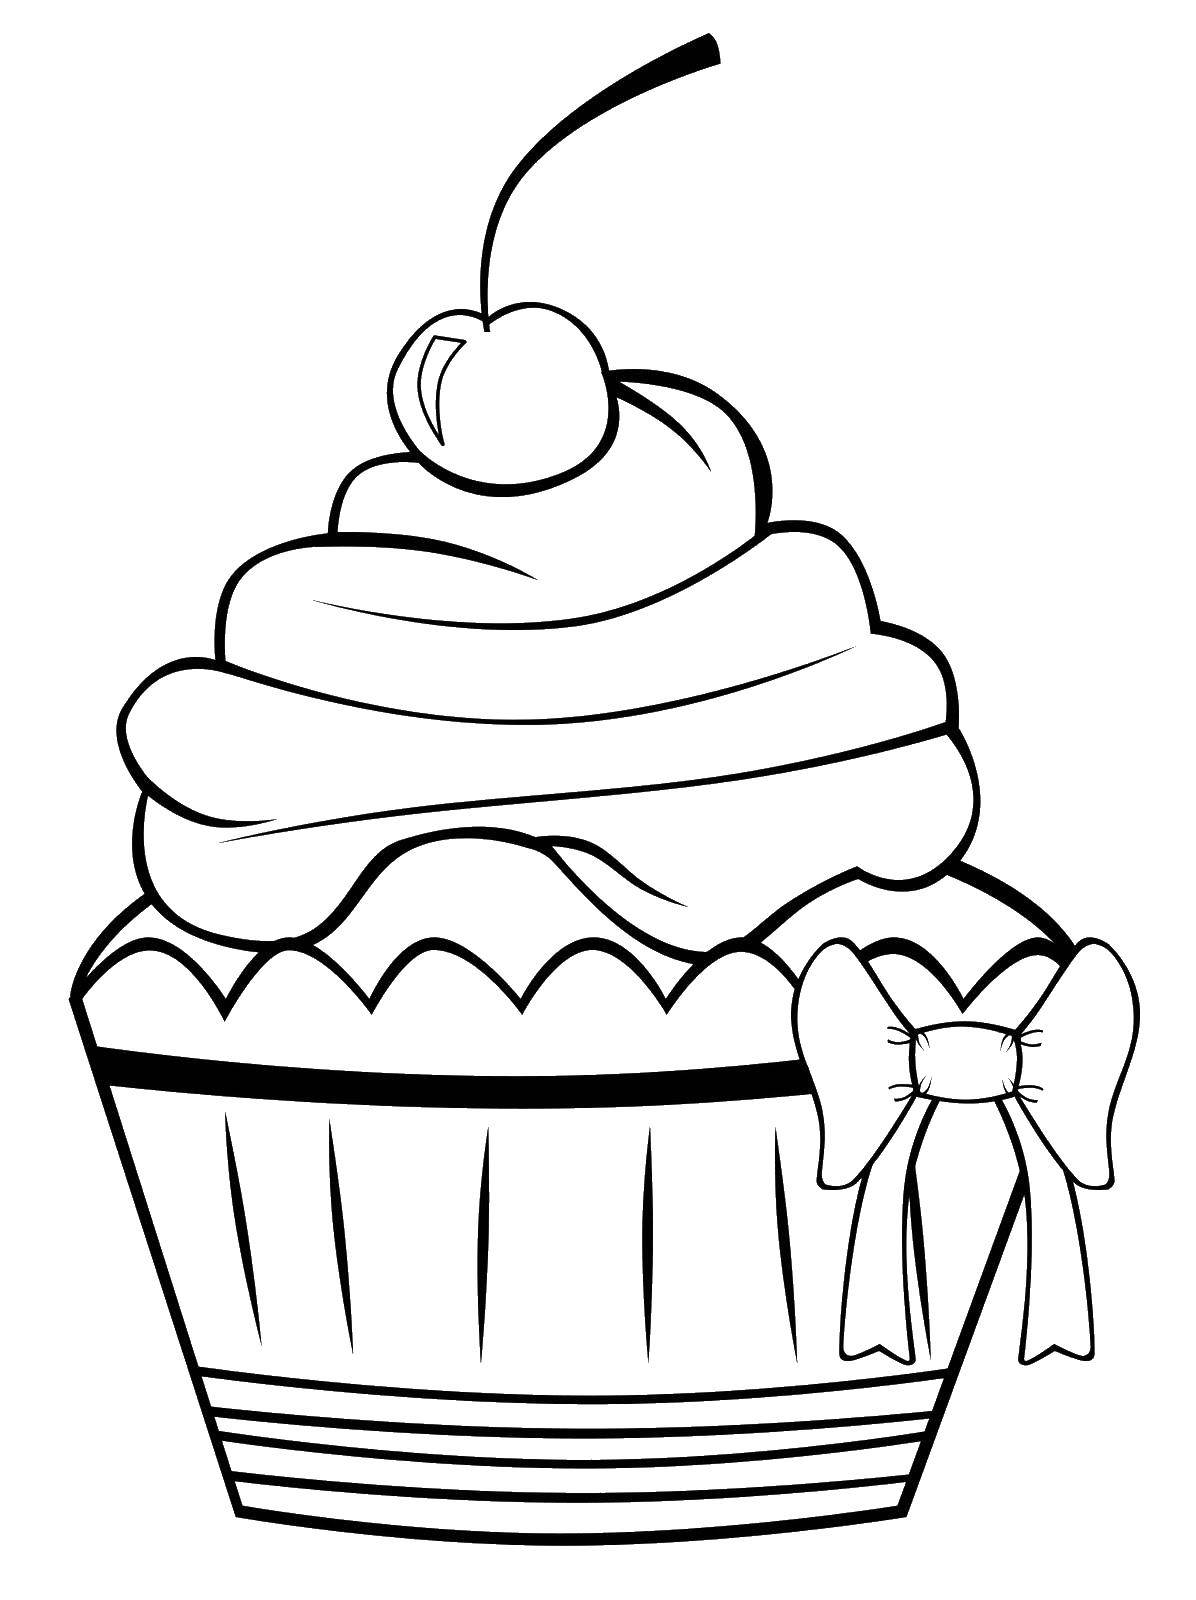 Coloring Cupcake with a cherry. Category cakes. Tags:  cakes, cupcakes, cherries.